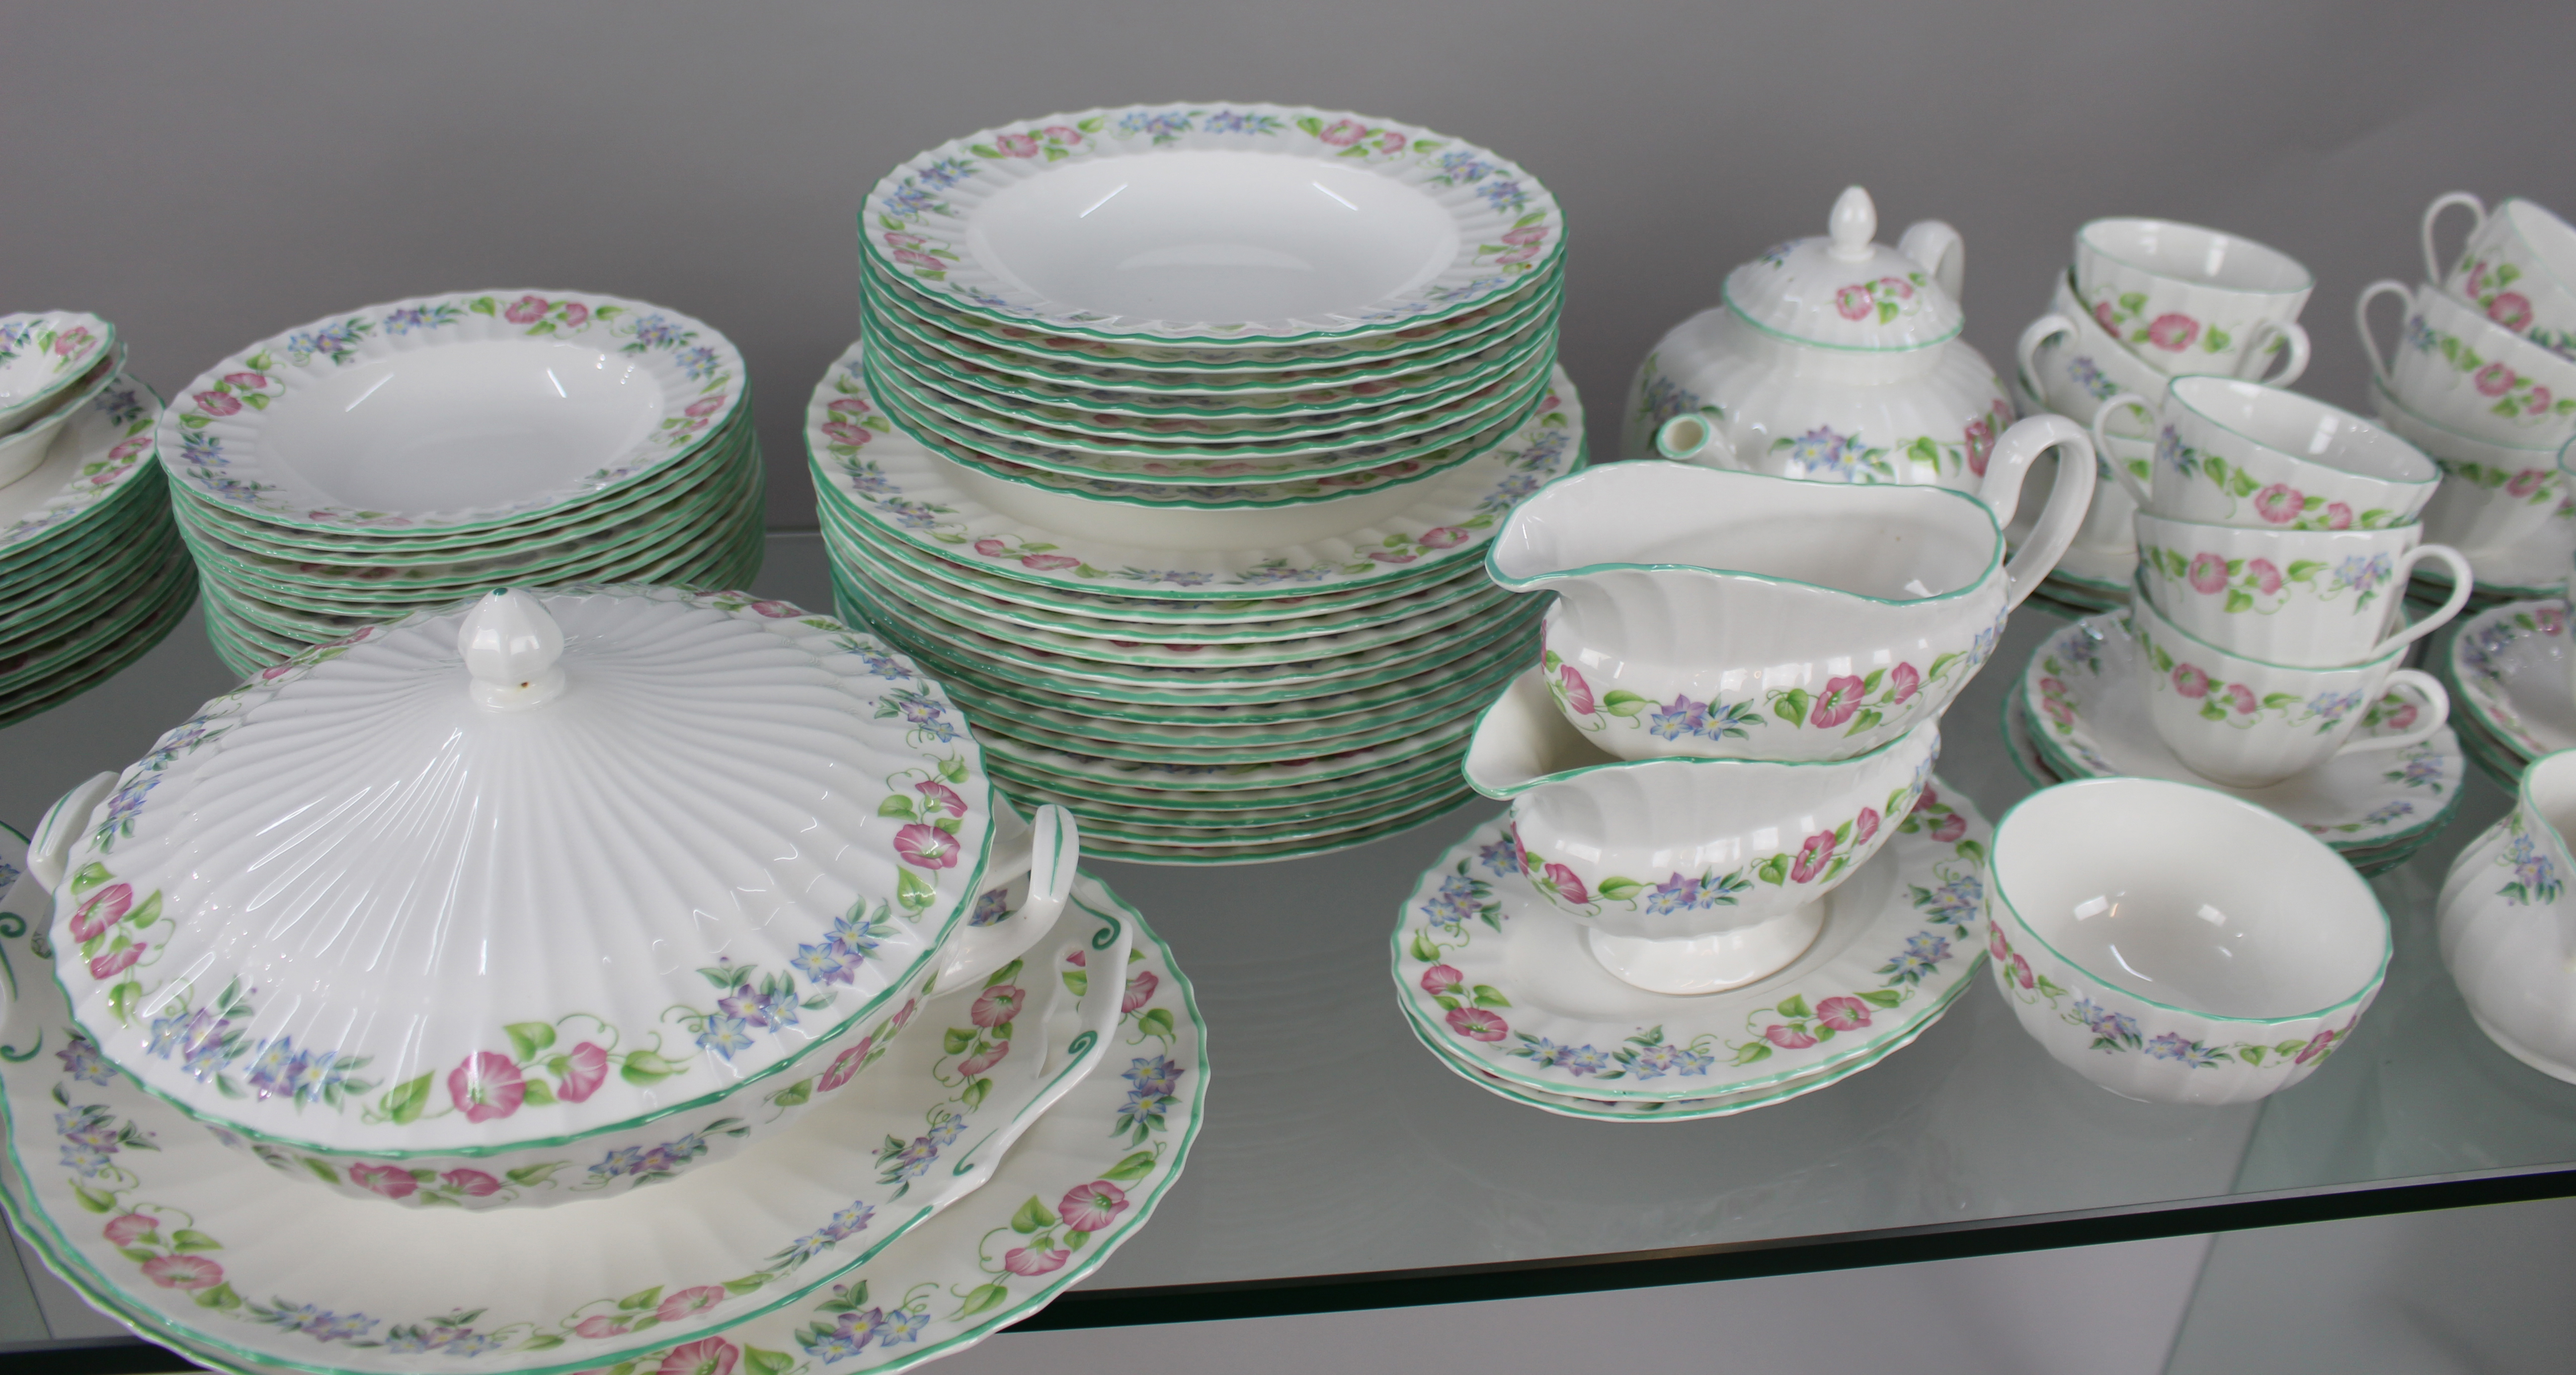 Royal Worcester English Garden 12 Place Dinner Service - Image 5 of 9